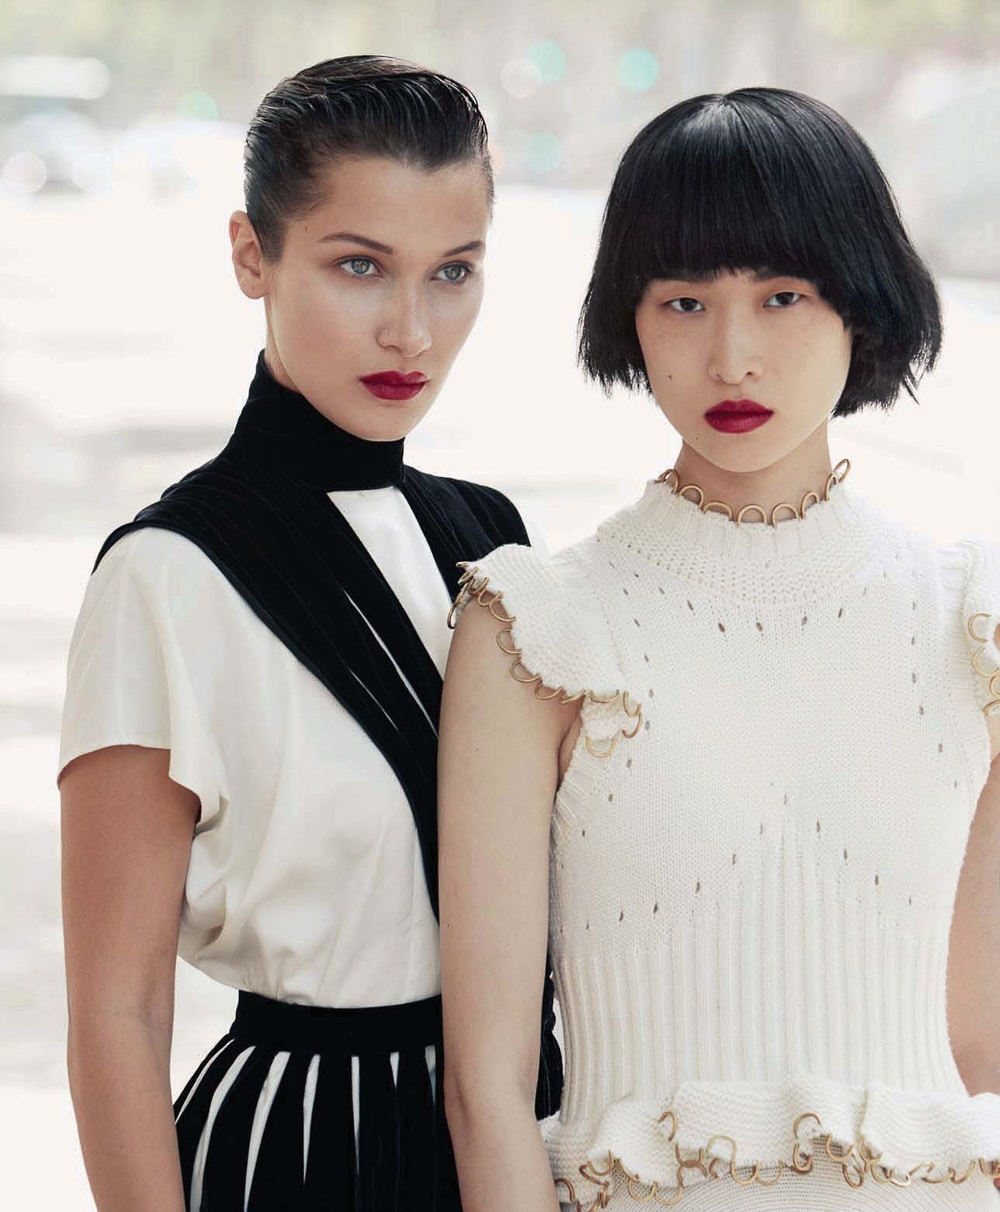 Vogue China September 2017 Bella Hadid and Chu Wong by Patrick Demarchelier